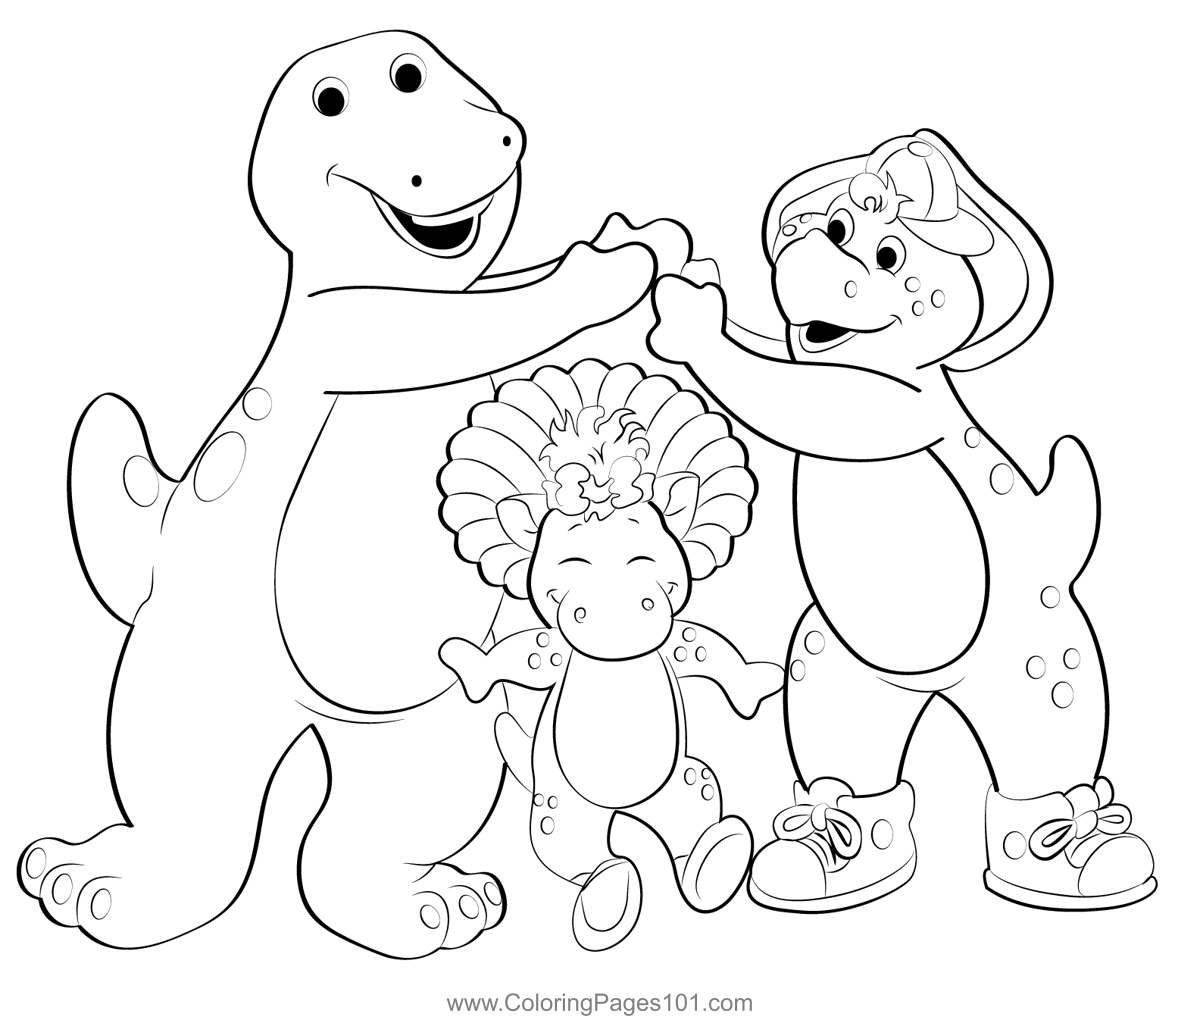 Barney And His Friends Coloring Page for Kids - Free Barney & Friends ...